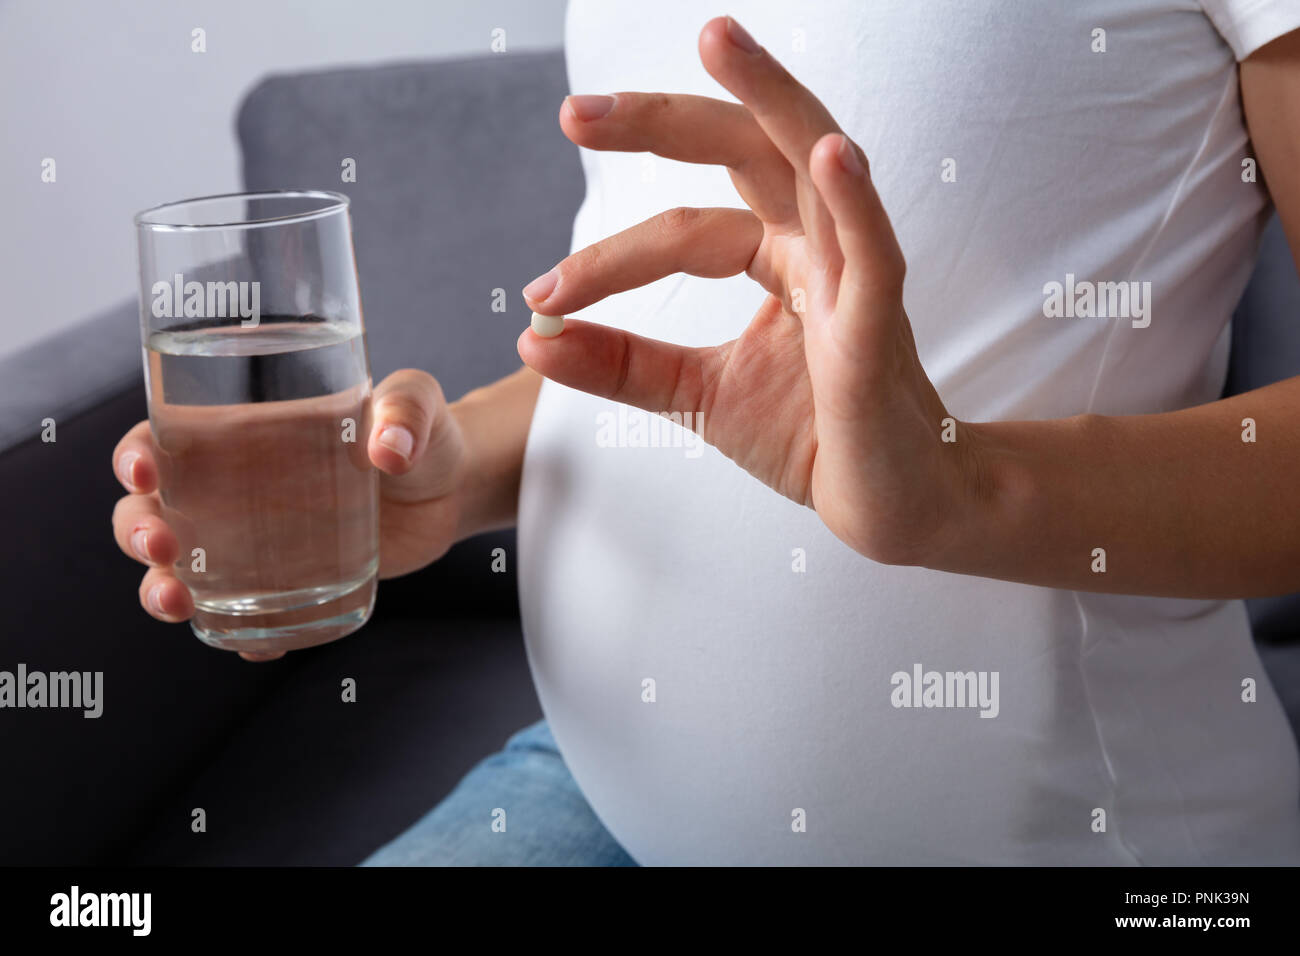 Midsection View Of A Pregnant Woman With Glass Of Water Taking Medicine At Home Stock Photo